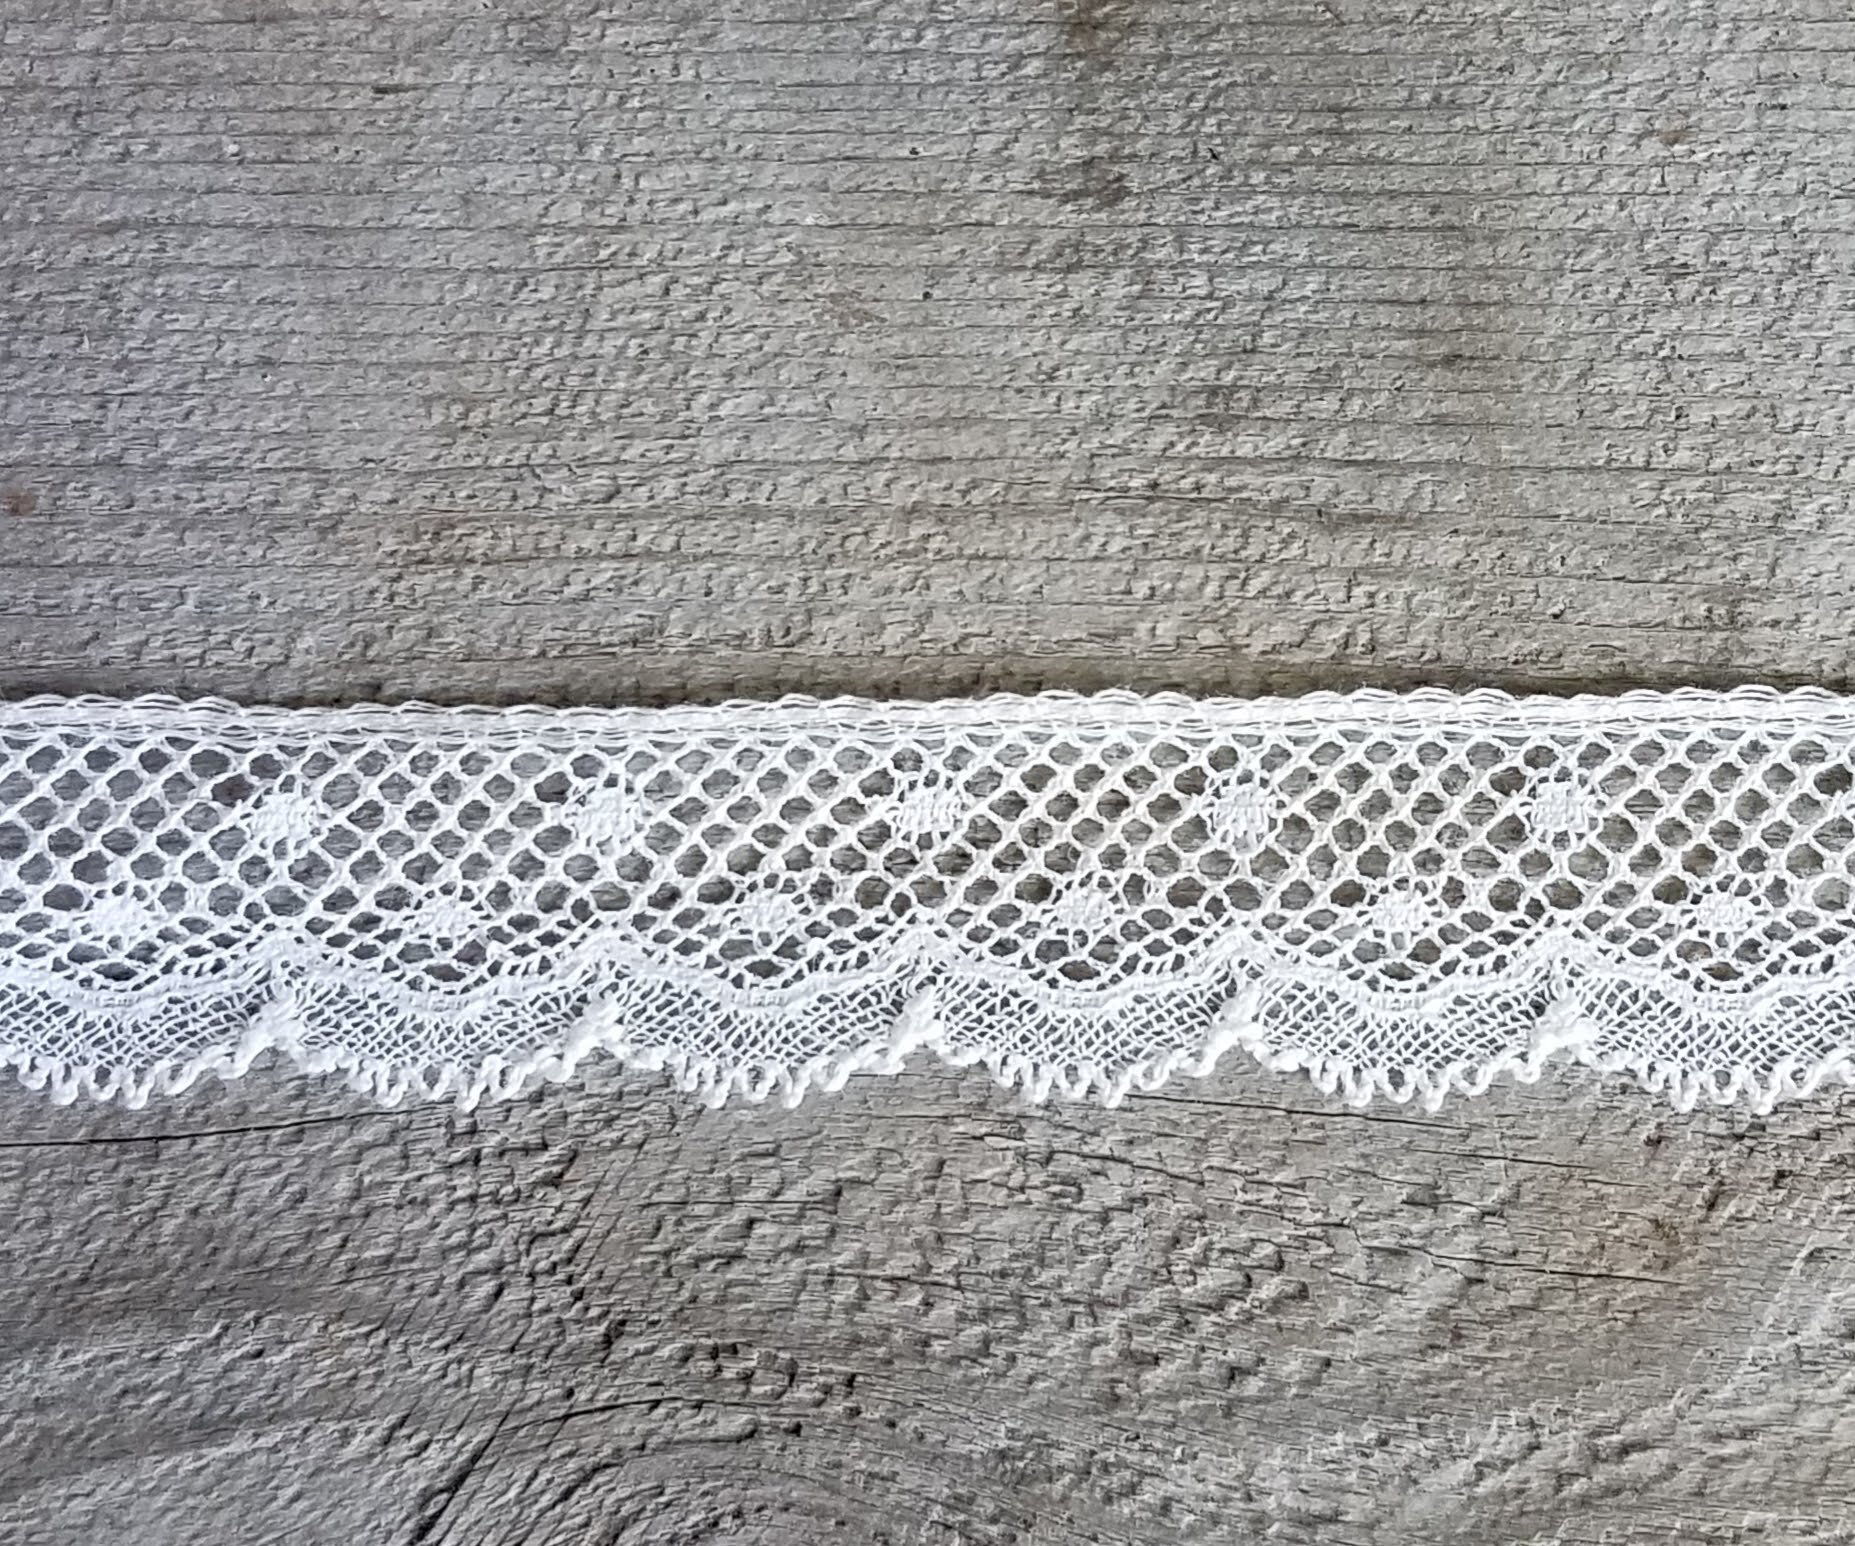 3 3/4 Wide Pale Yellow Leavers Lace, Made in France, Sold by the Yard 